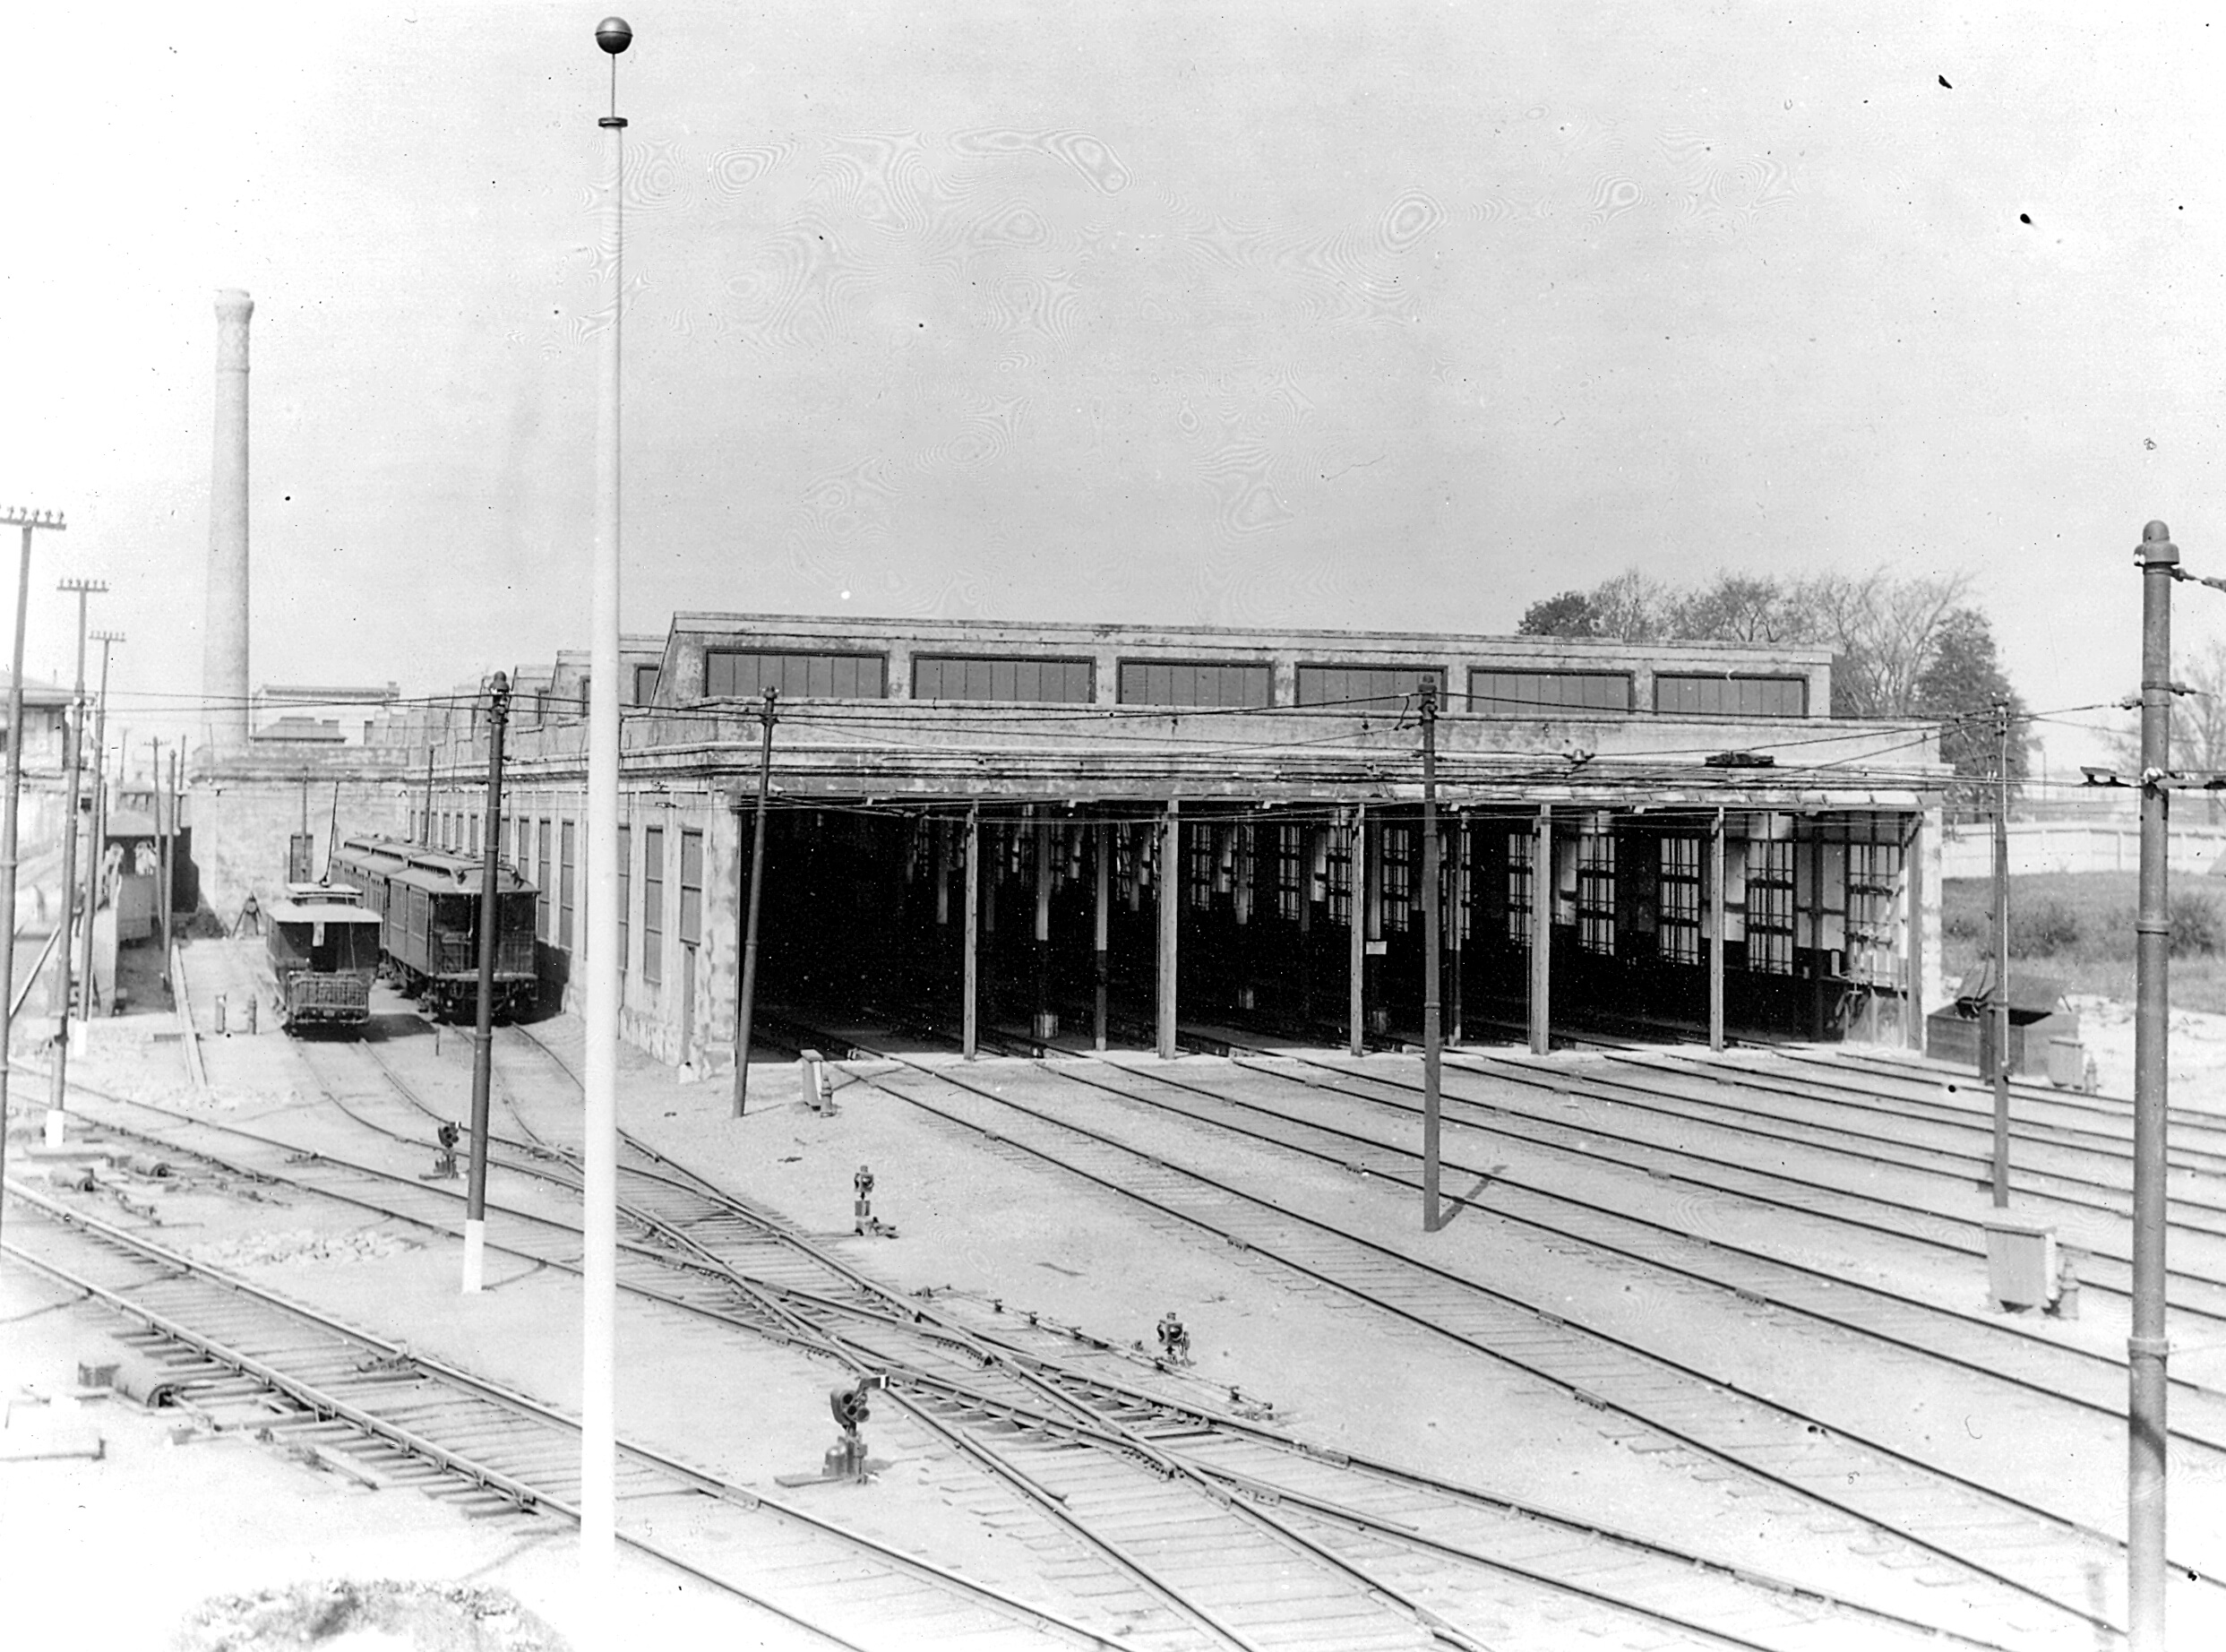 An early 20th-century photo of the Fresh Pond Depot in Ridgewood